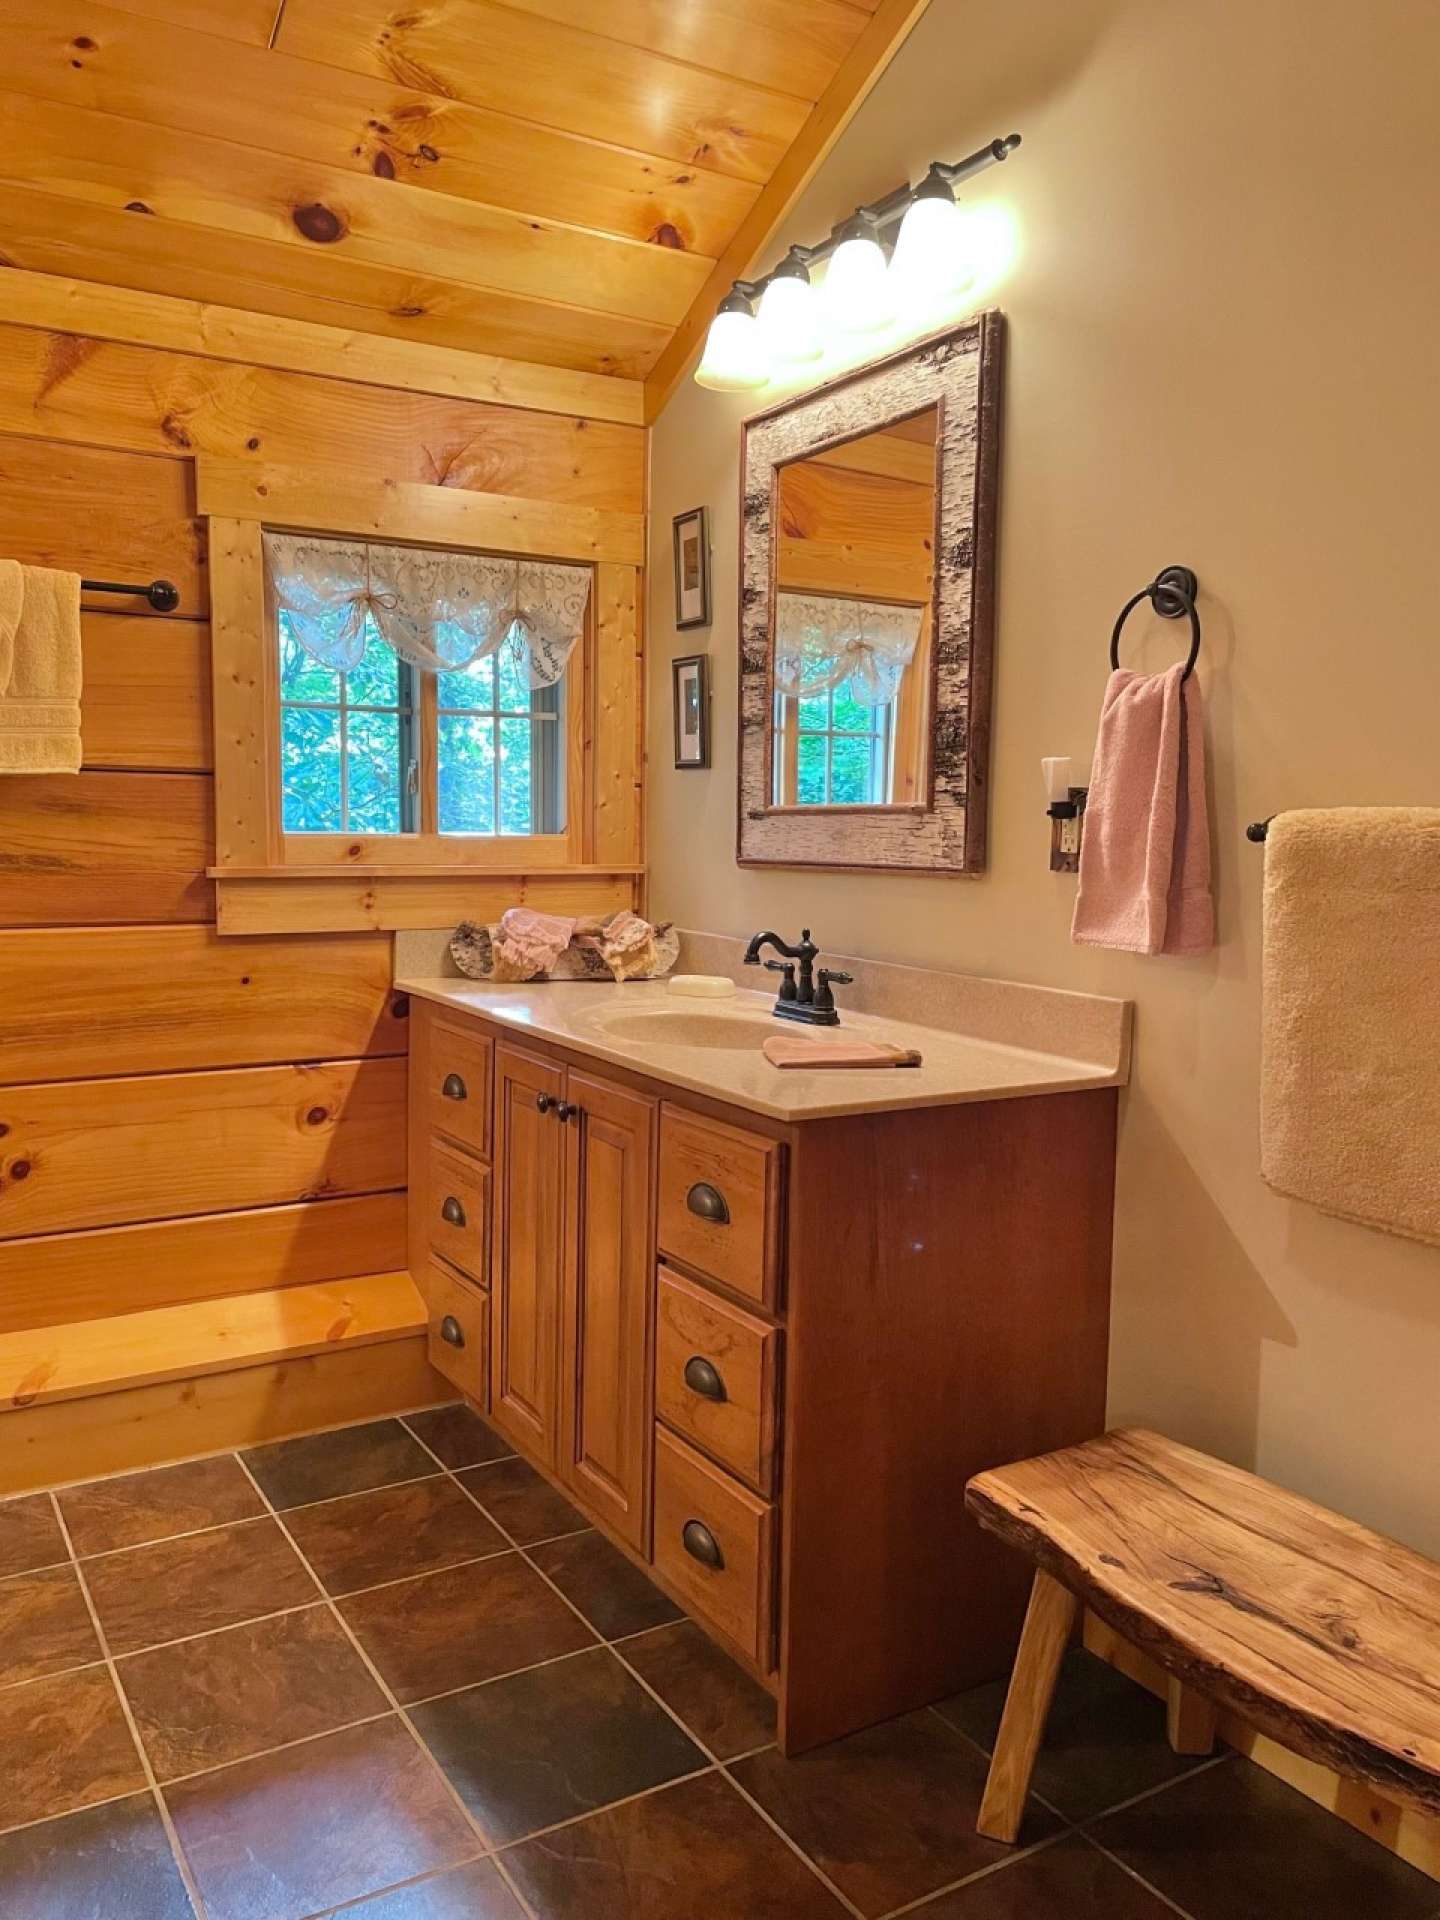 The upper level bath is also spacious and shared by the loft and two bedrooms.